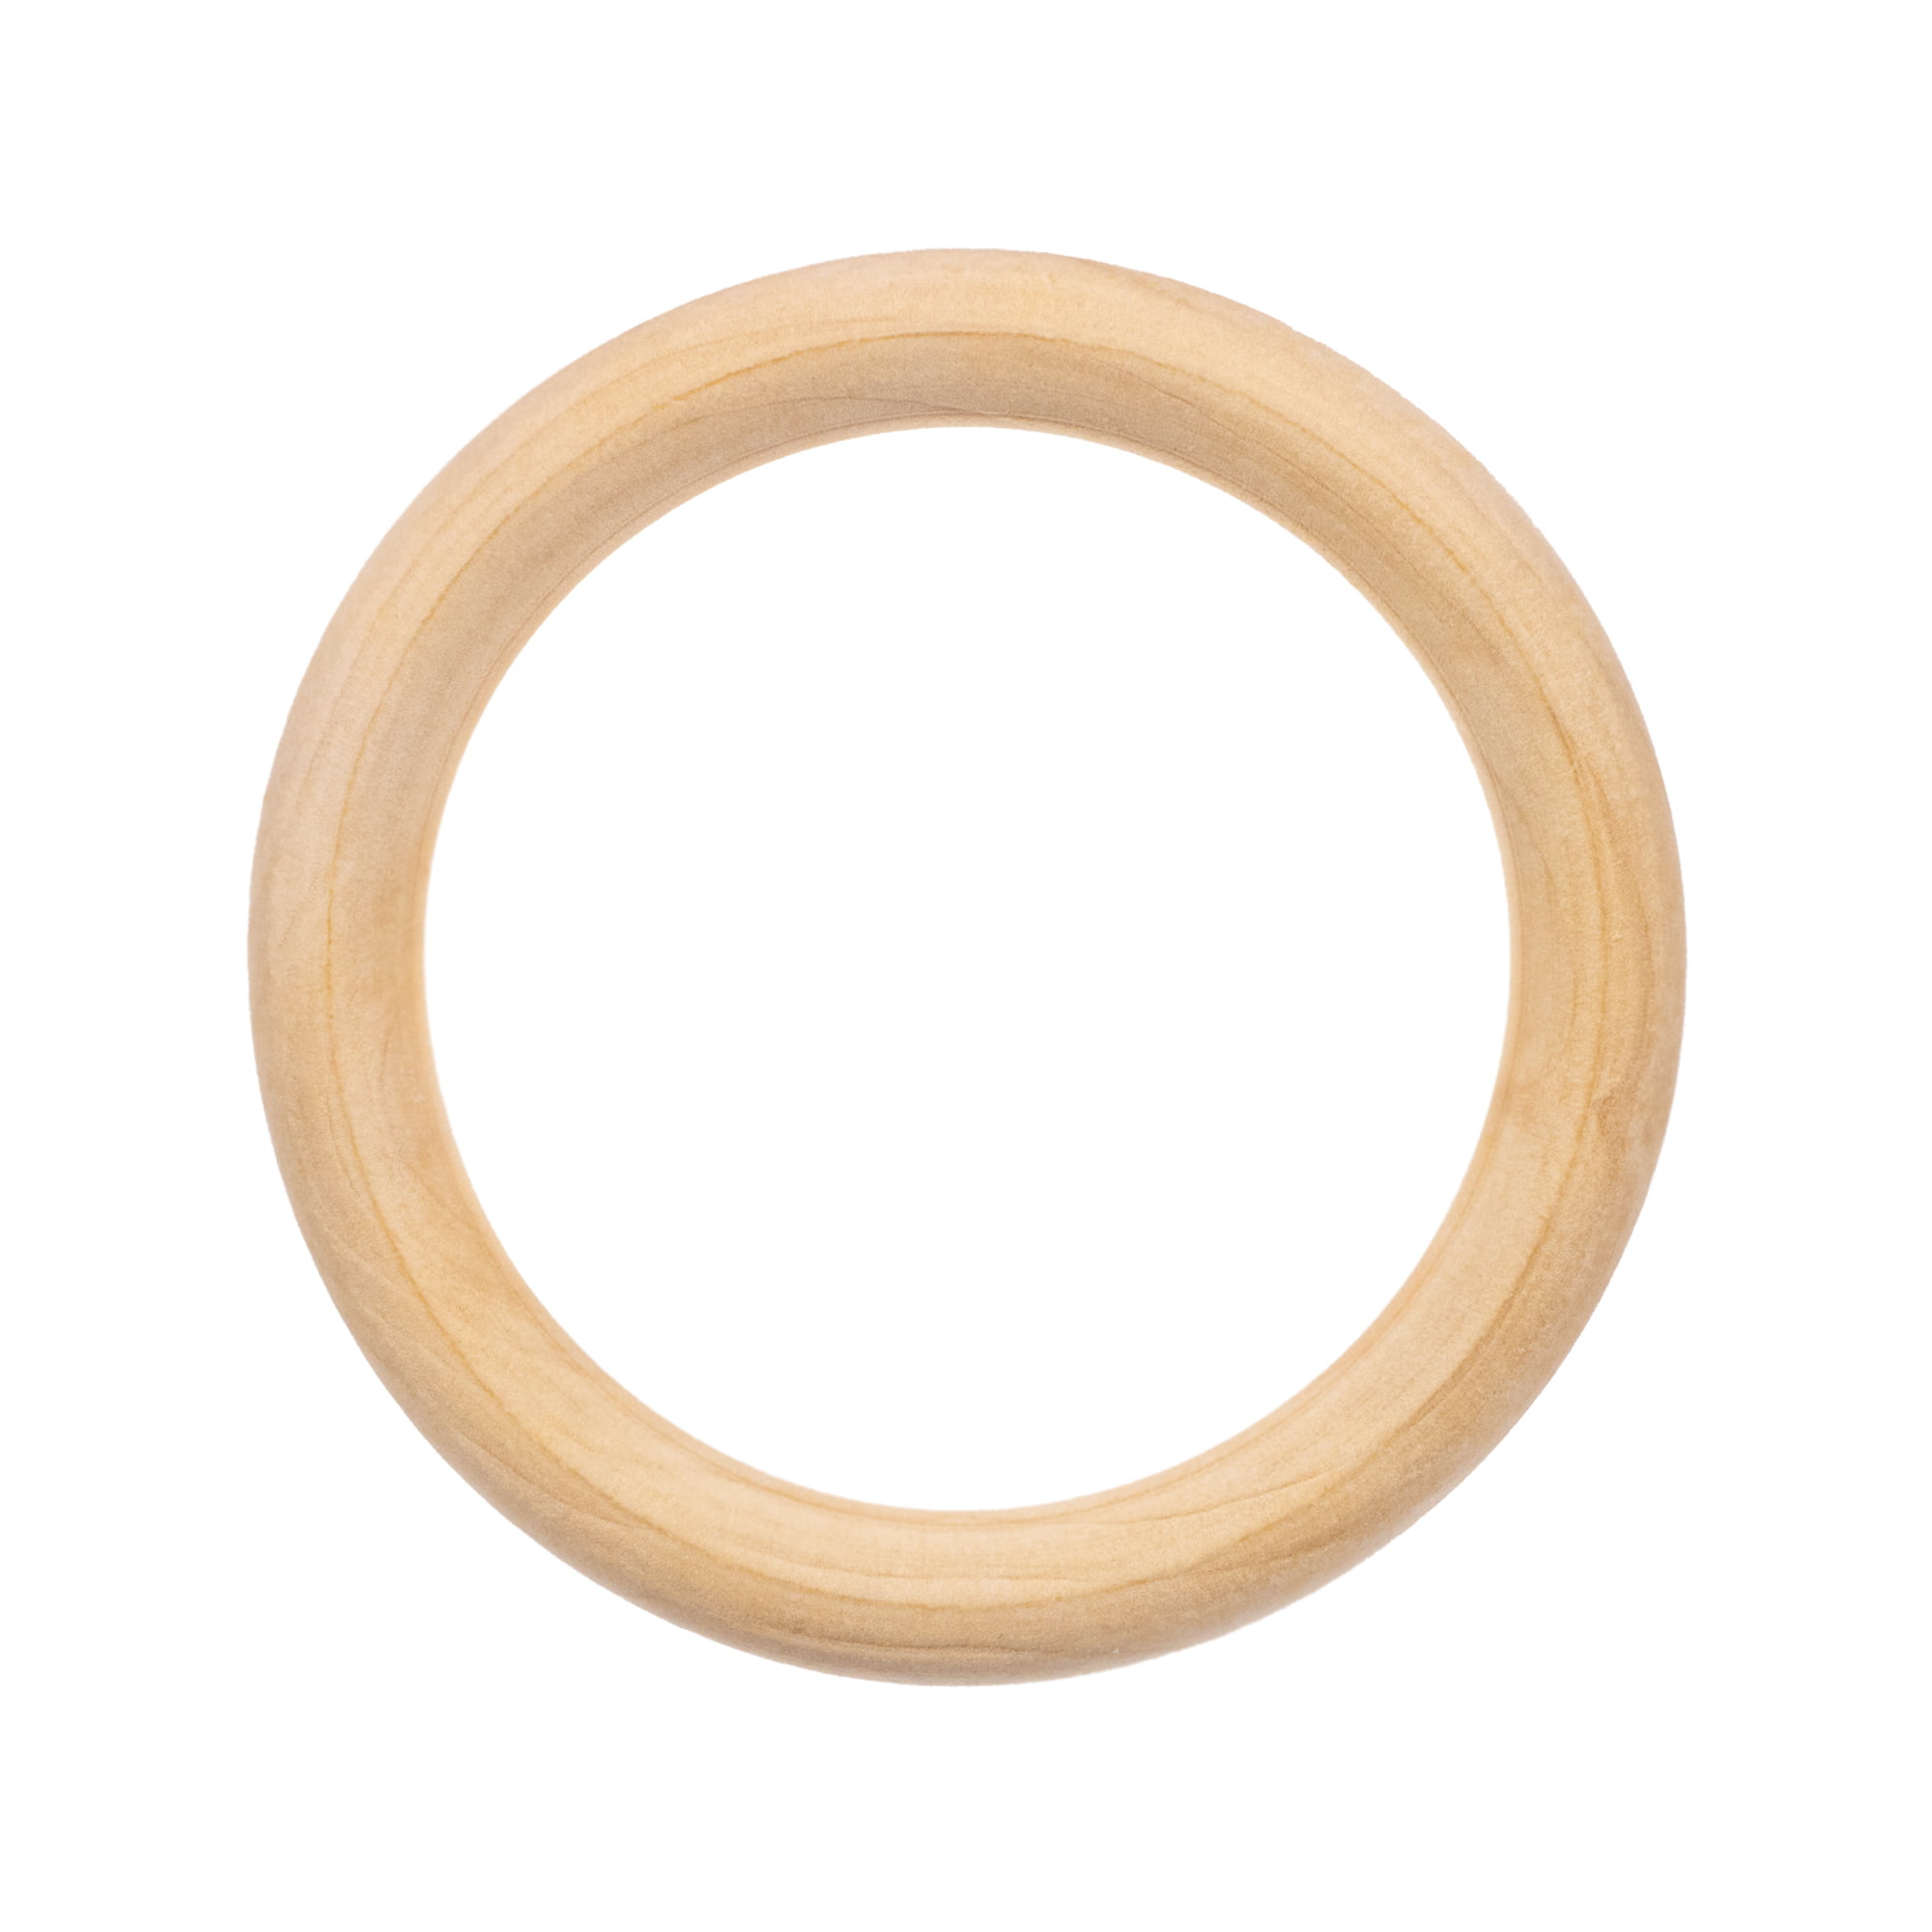 Mandala Crafts Unfinished Natural Wood Rings Kit for Crafts, Macramé, Knitting, Wooden Jewelry Making, Pack of 50 (Natural, 1.2 1.5 2 2.3 2.75 Inches)